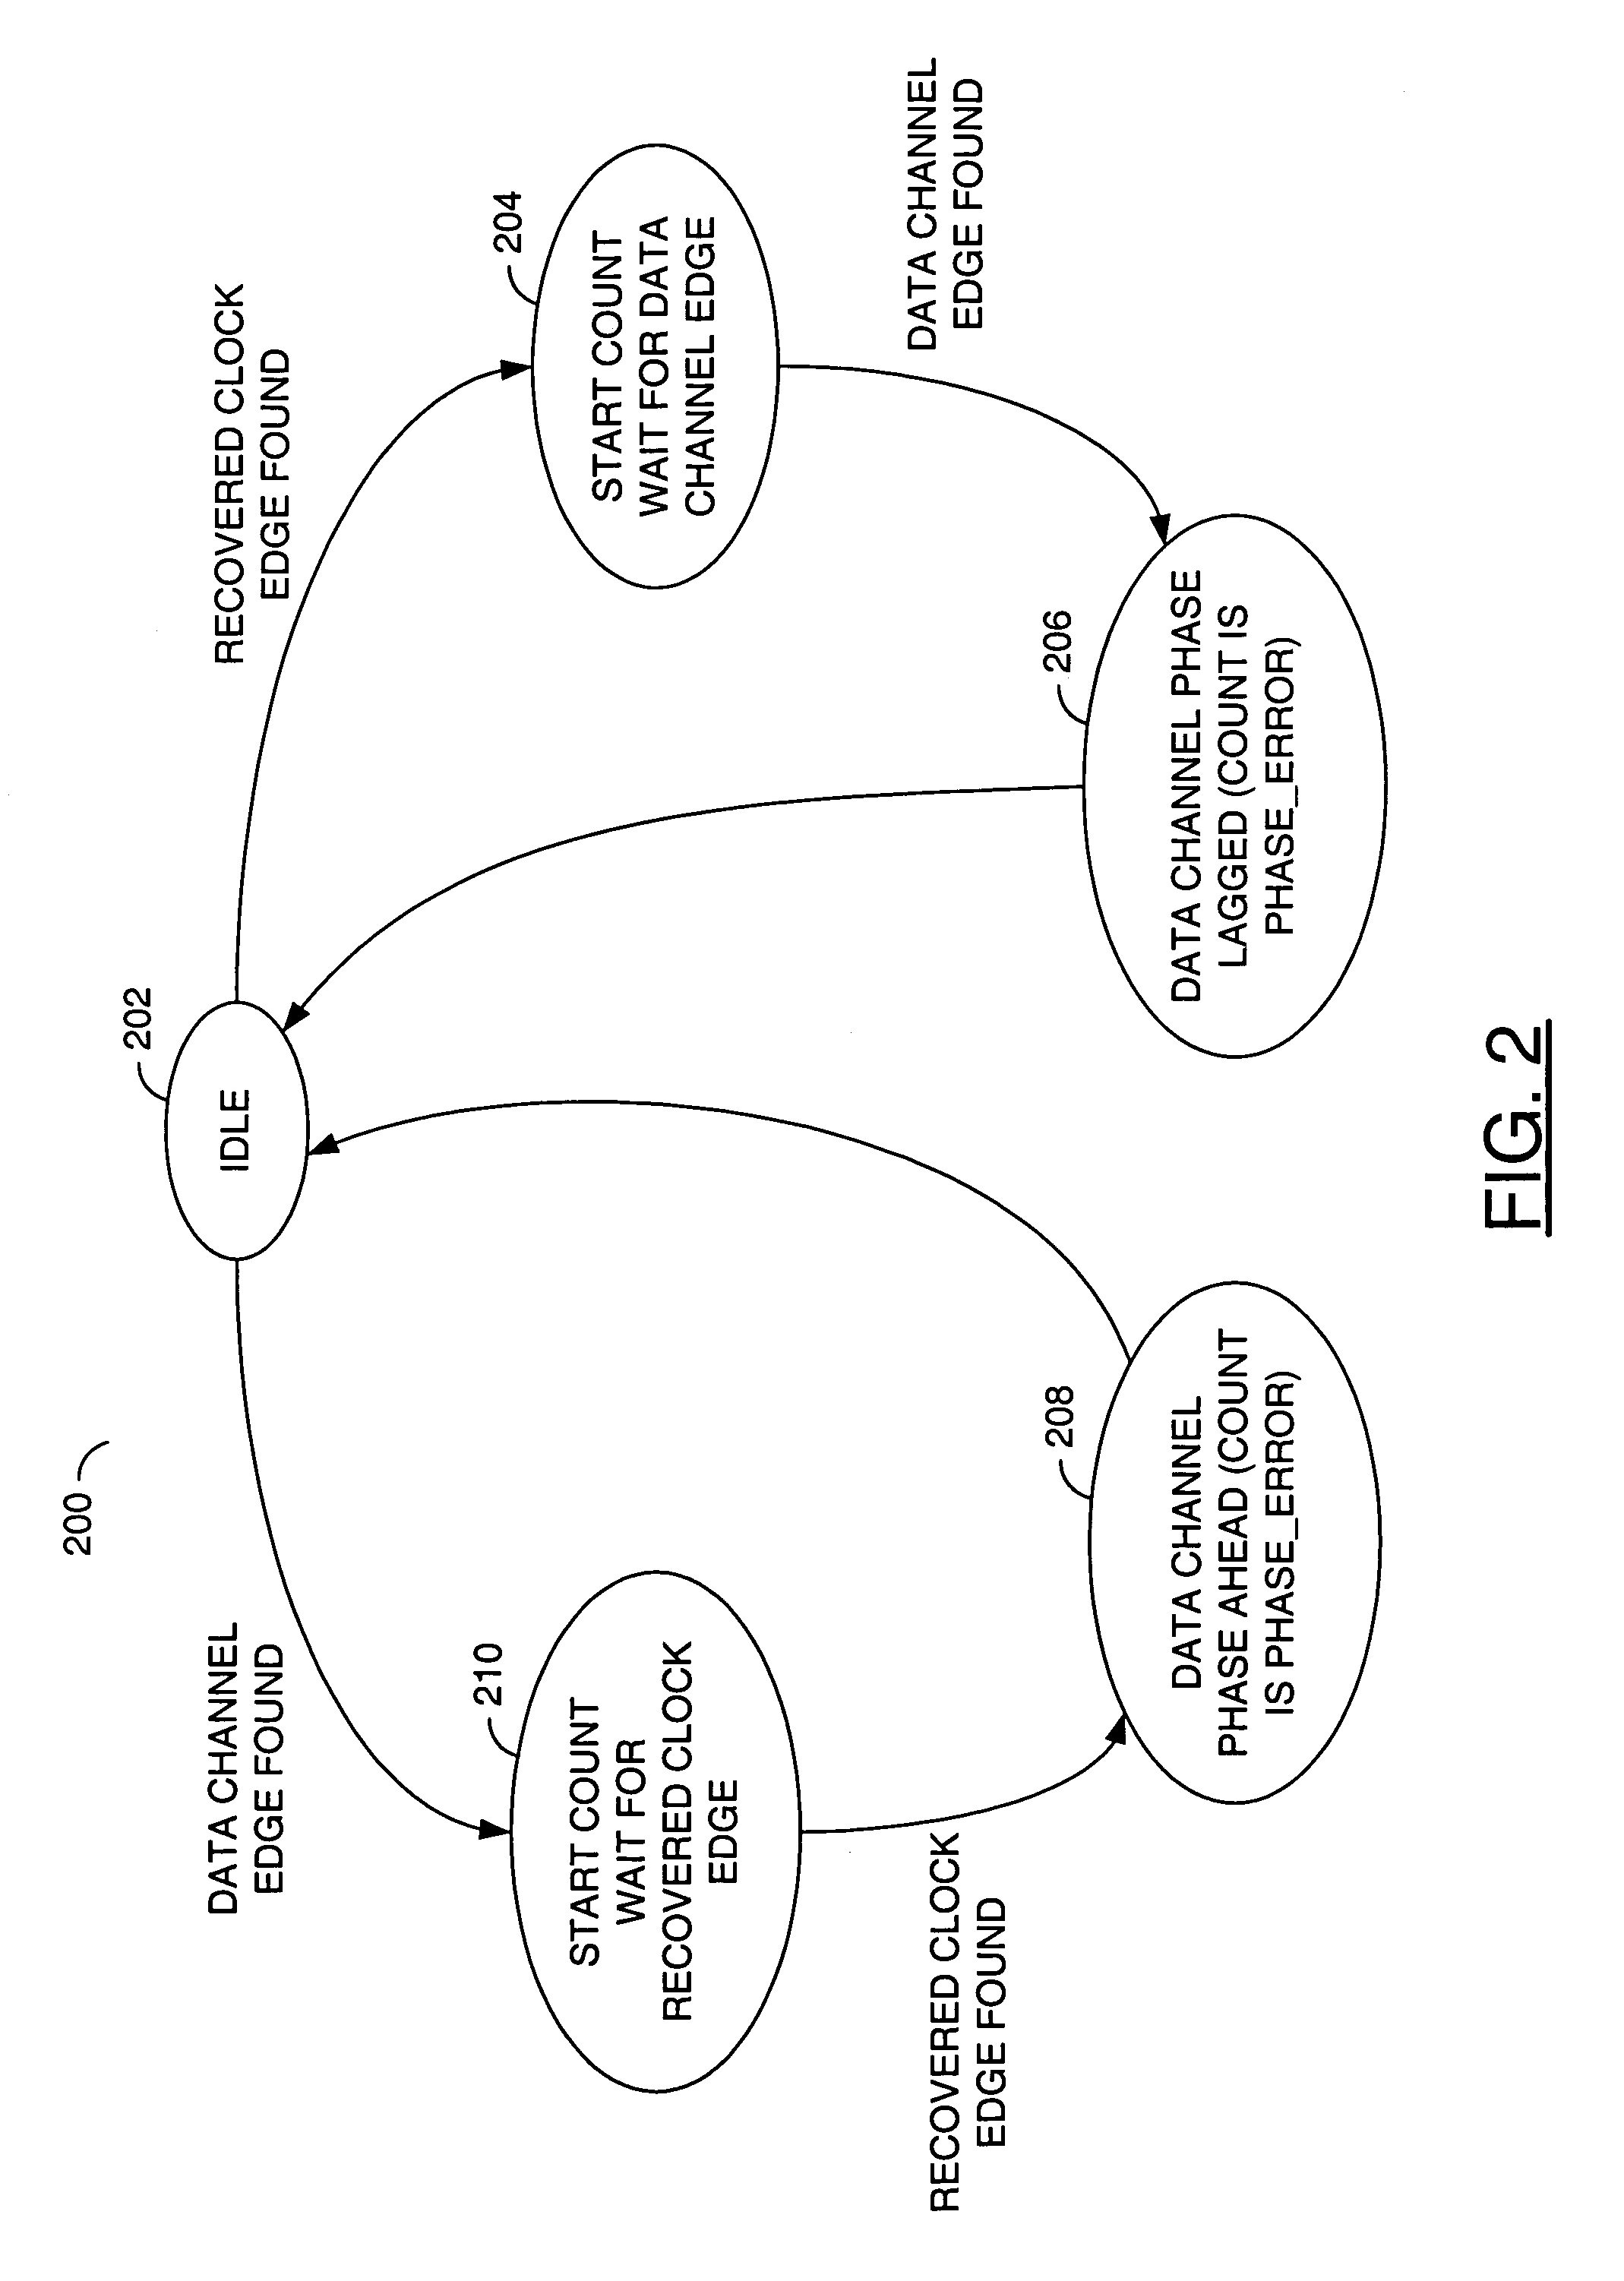 Low jitter and/or fast lock-in clock recovery circuit